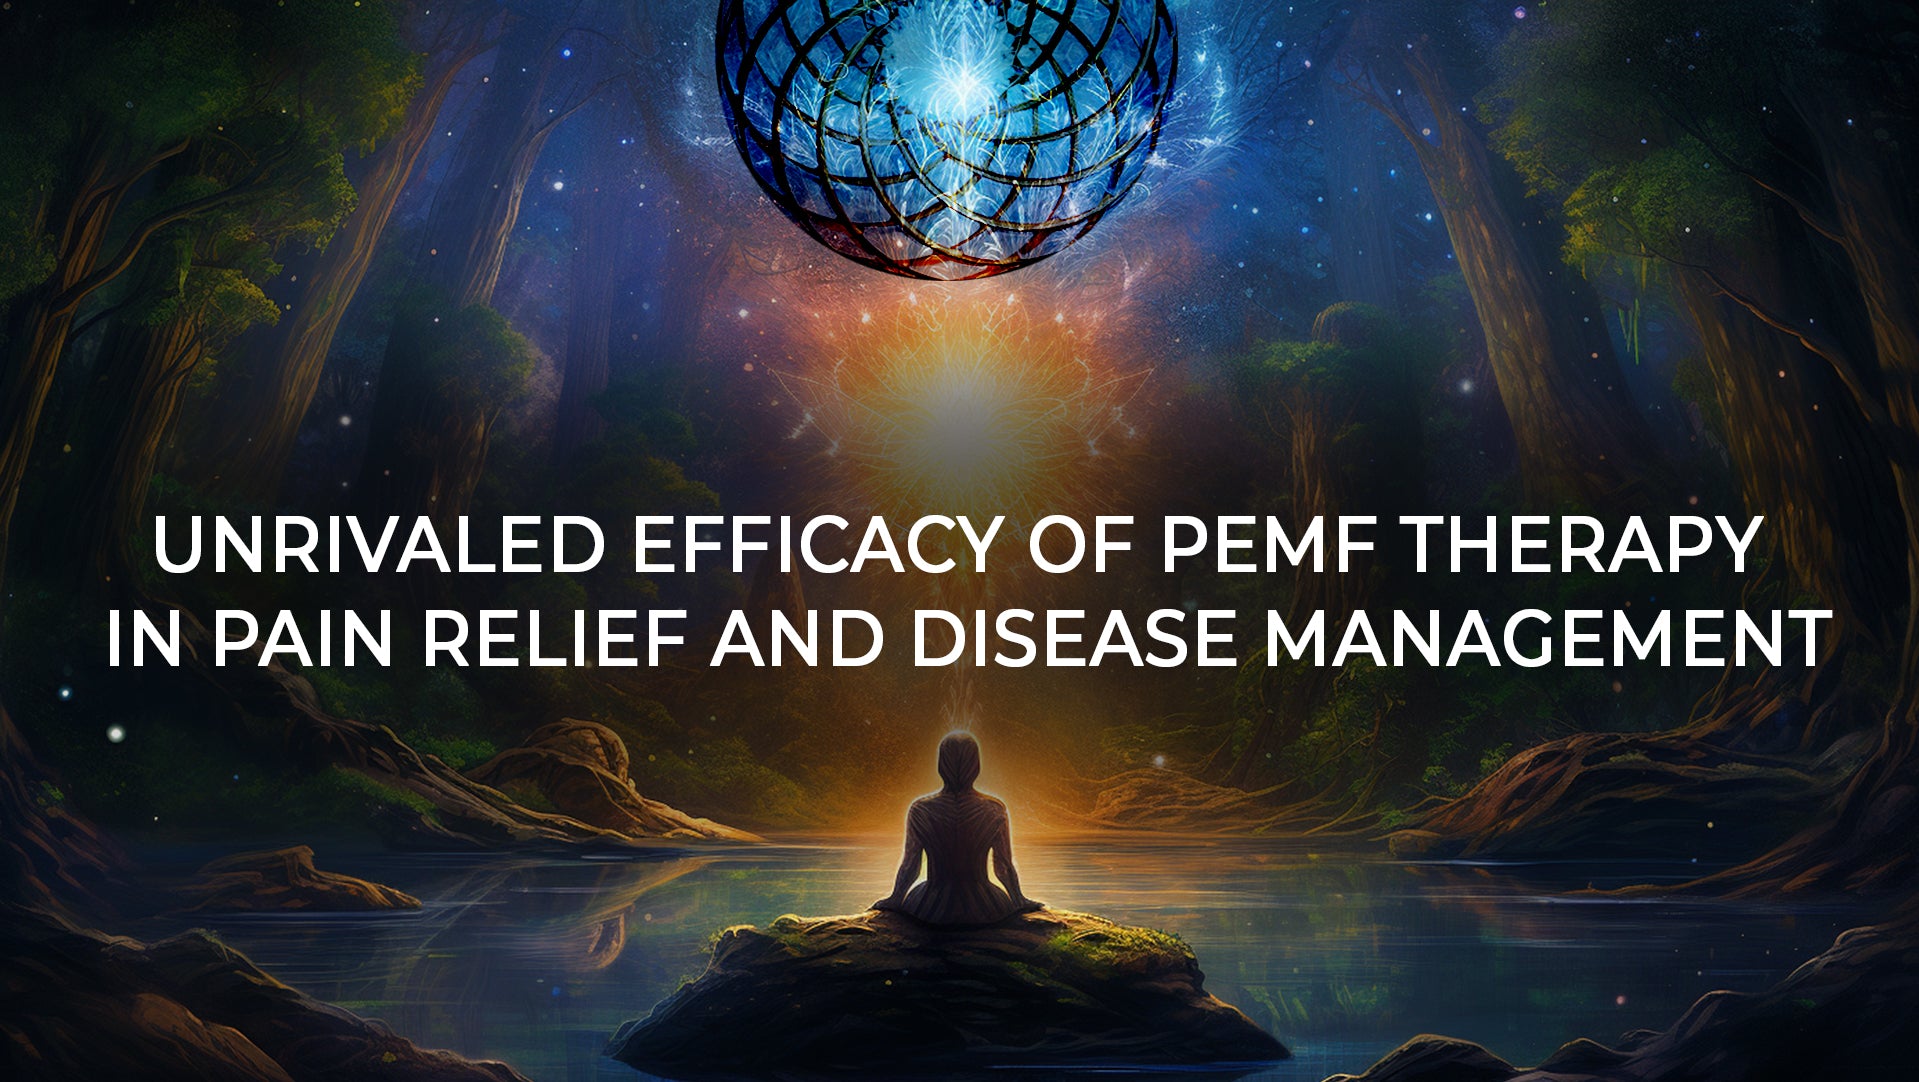 Unrivaled Efficacy of PEMF Therapy in Pain Relief and Disease Management